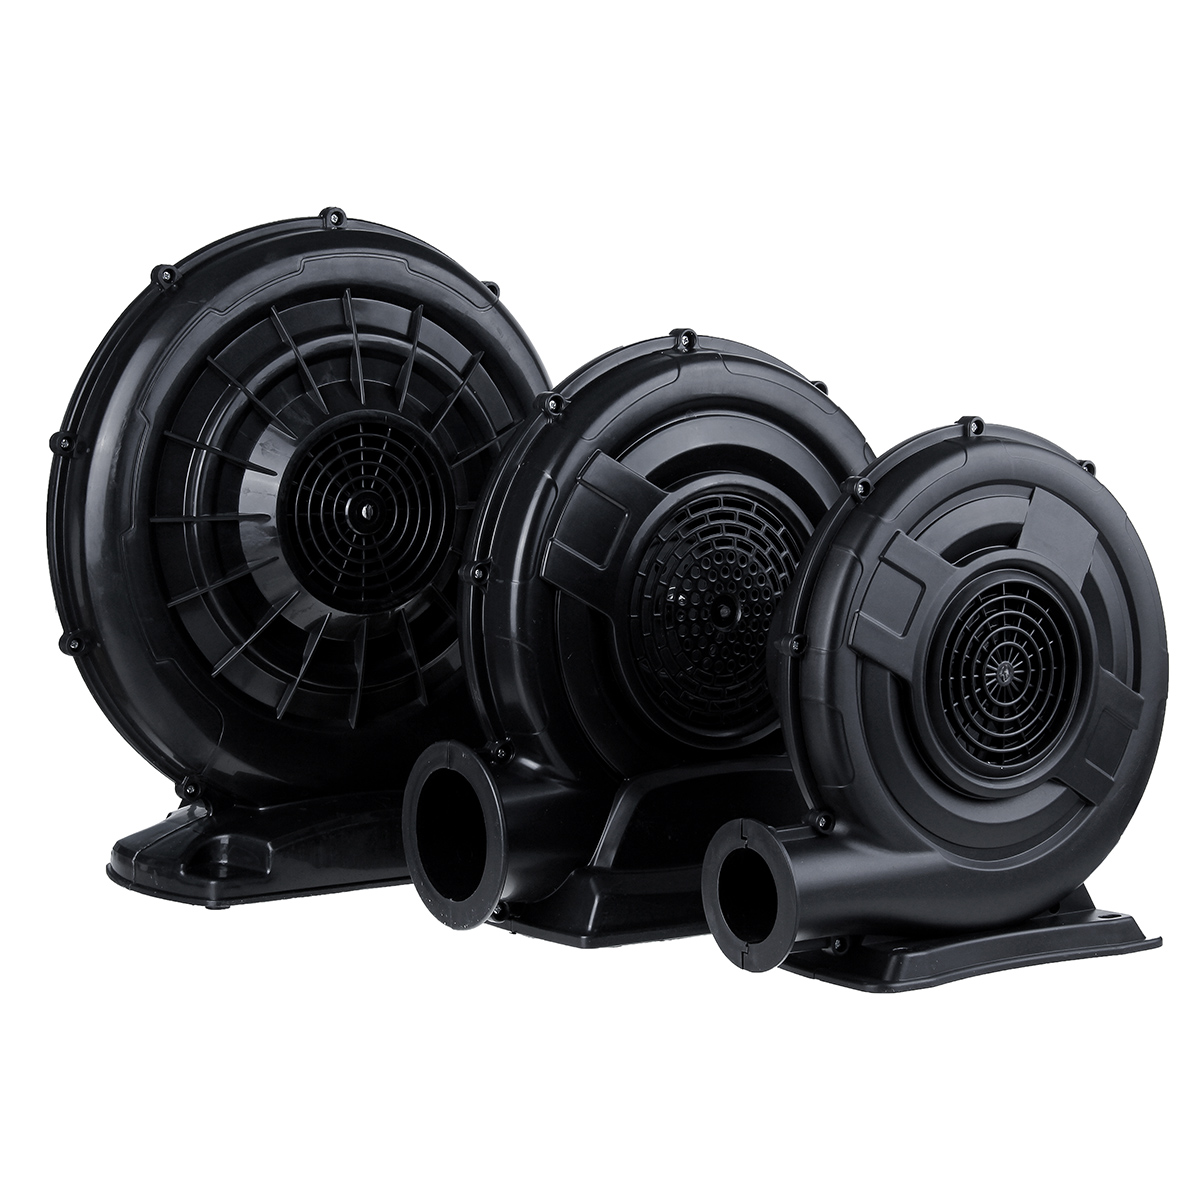 Heater-Blower-Fan-Motor-Small-And-Low-Noise-Air-Blower-AC-For-Saab-9-3-2003-2012-For-Vauxhall-1774255-2